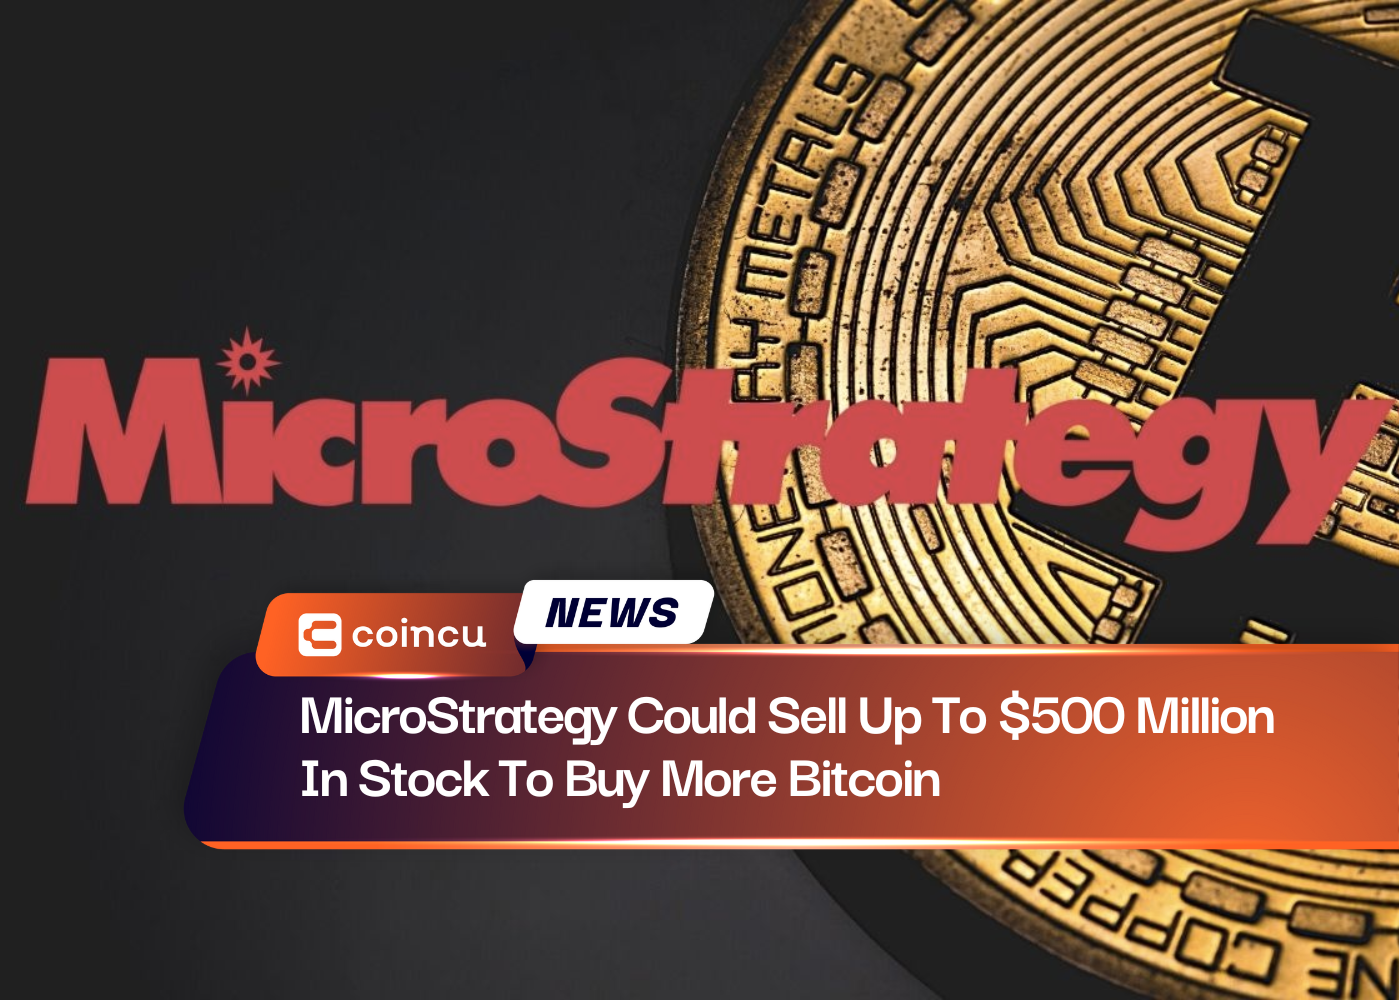 MicroStrategy Could Sell Up To $500 Million In Stock To Buy More Bitcoin